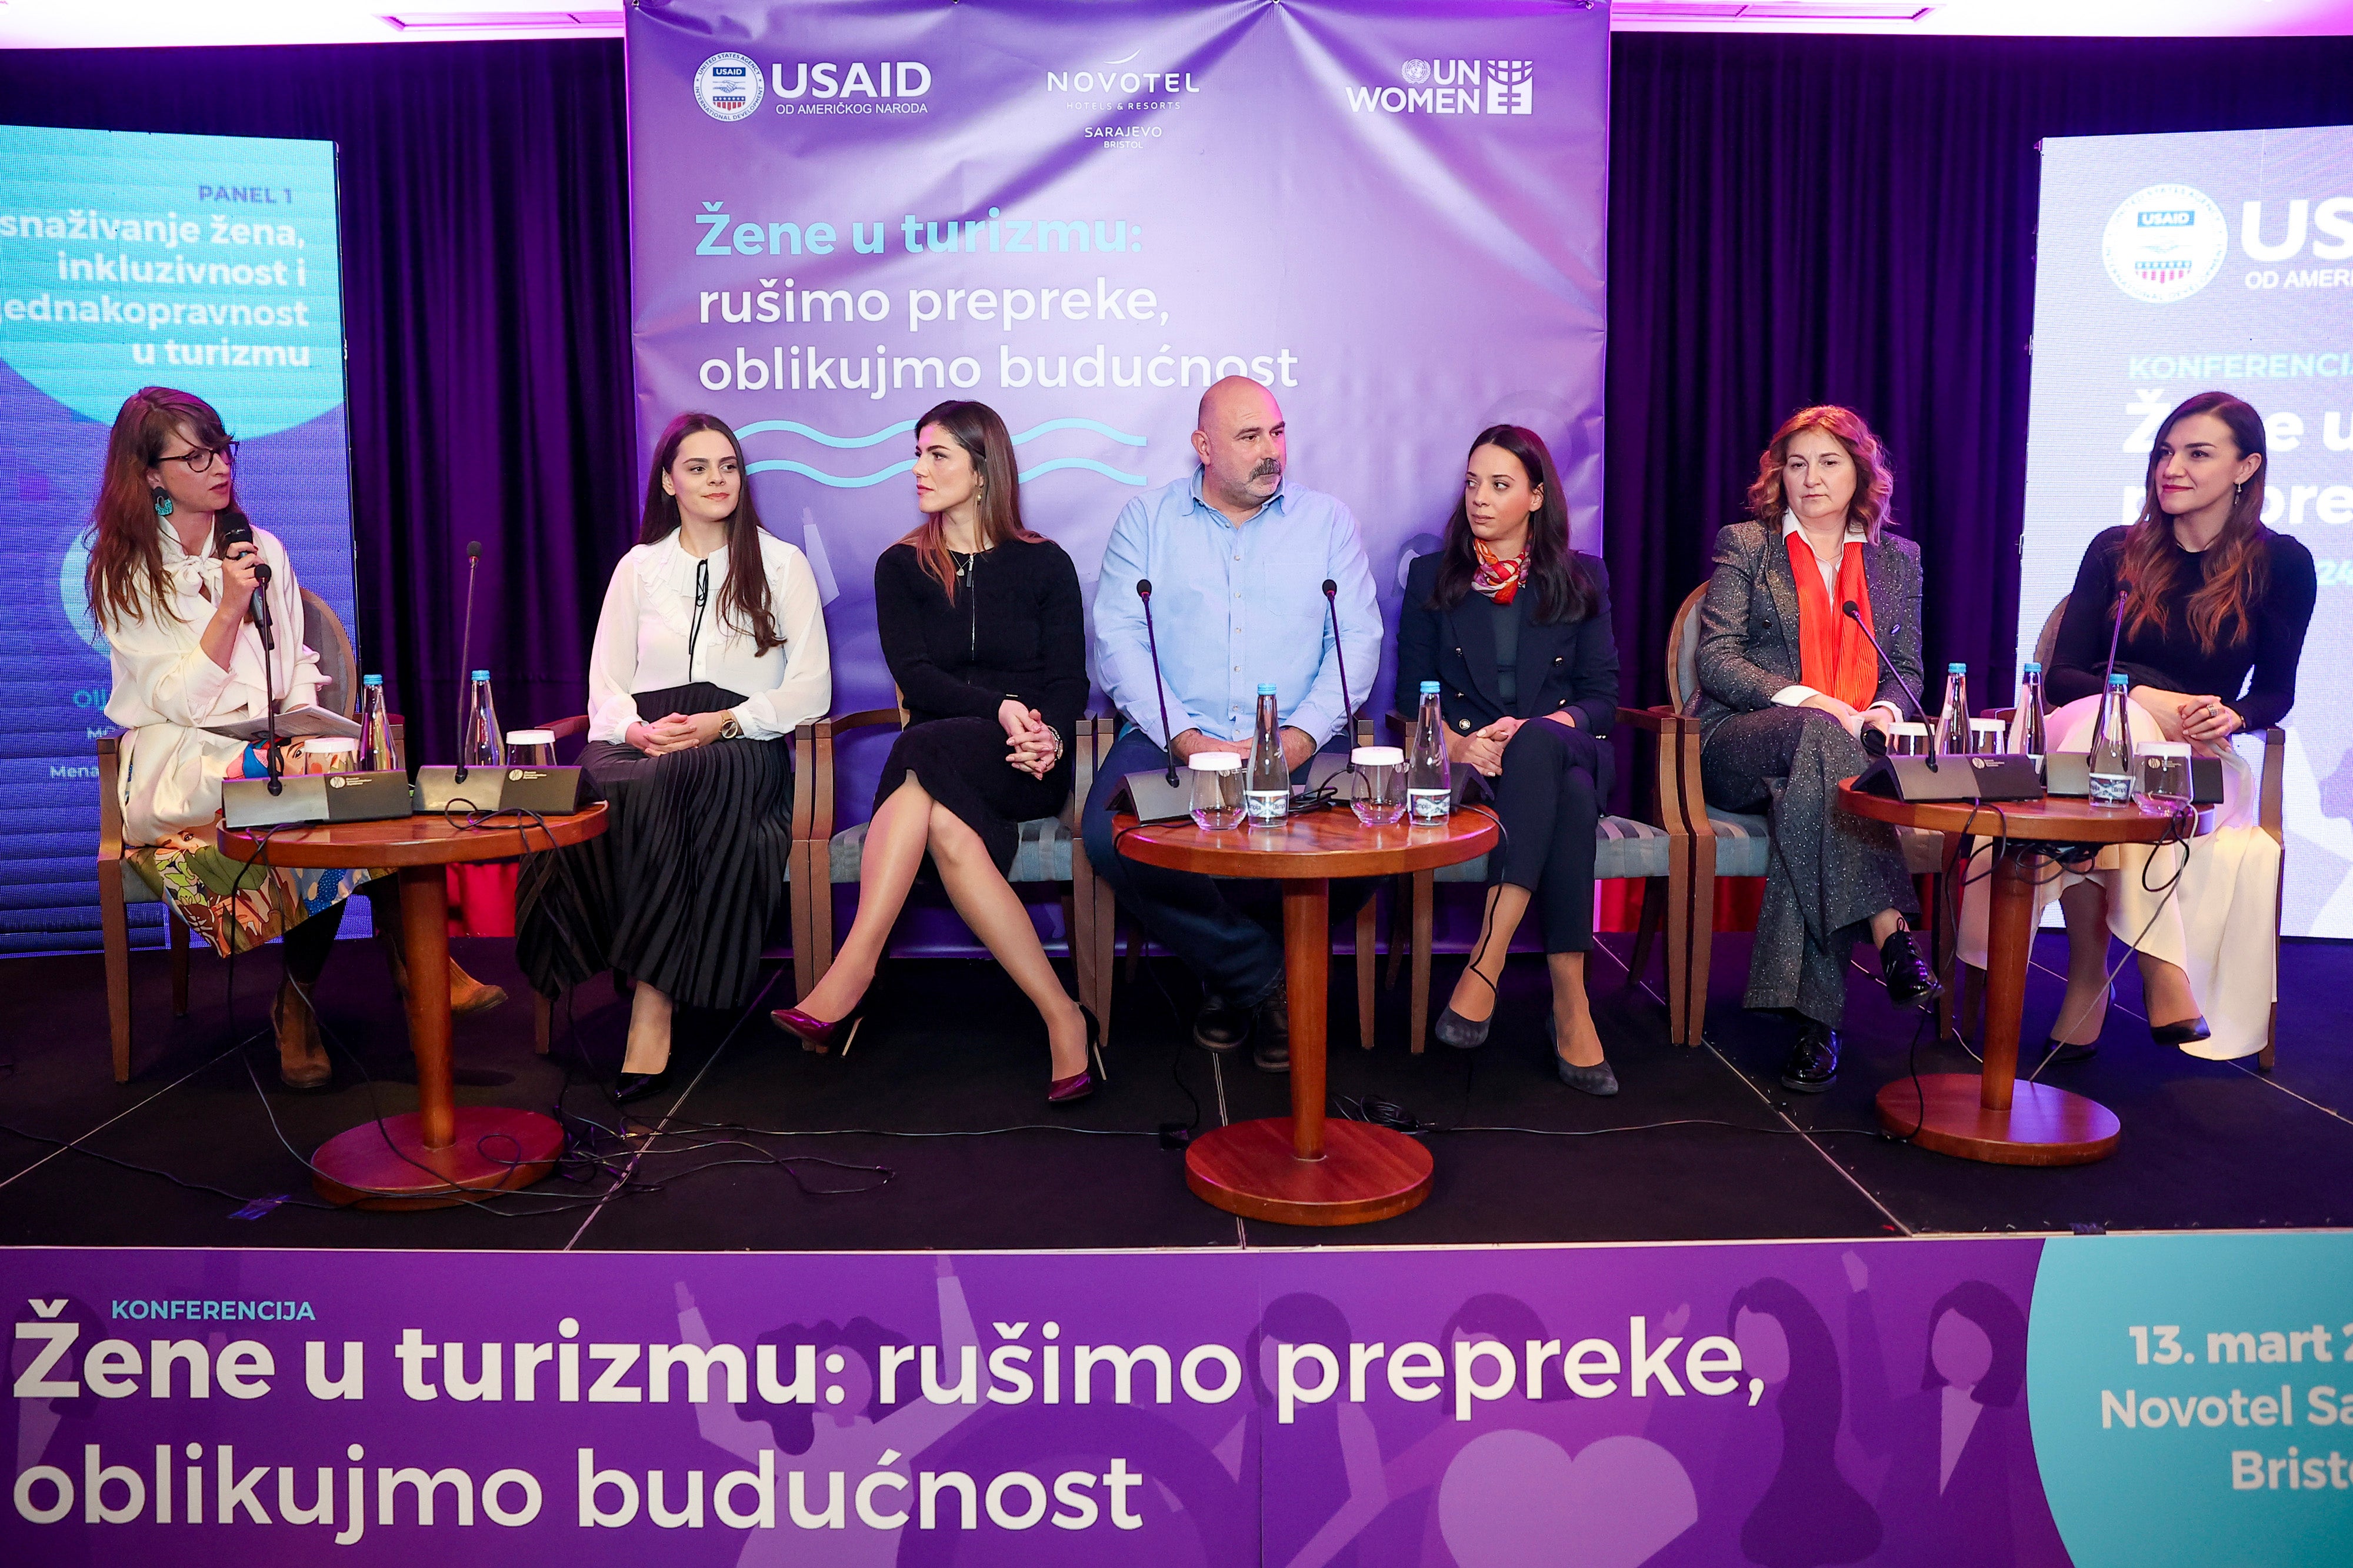 The first conference of its kind dedicated to women in tourism in Bosnia and Herzegovina, titled "Women in Tourism: Breaking Barriers, Shaping the Future," was held on 13 March in Sarajevo. Photo: UN Women/Armin Durgut